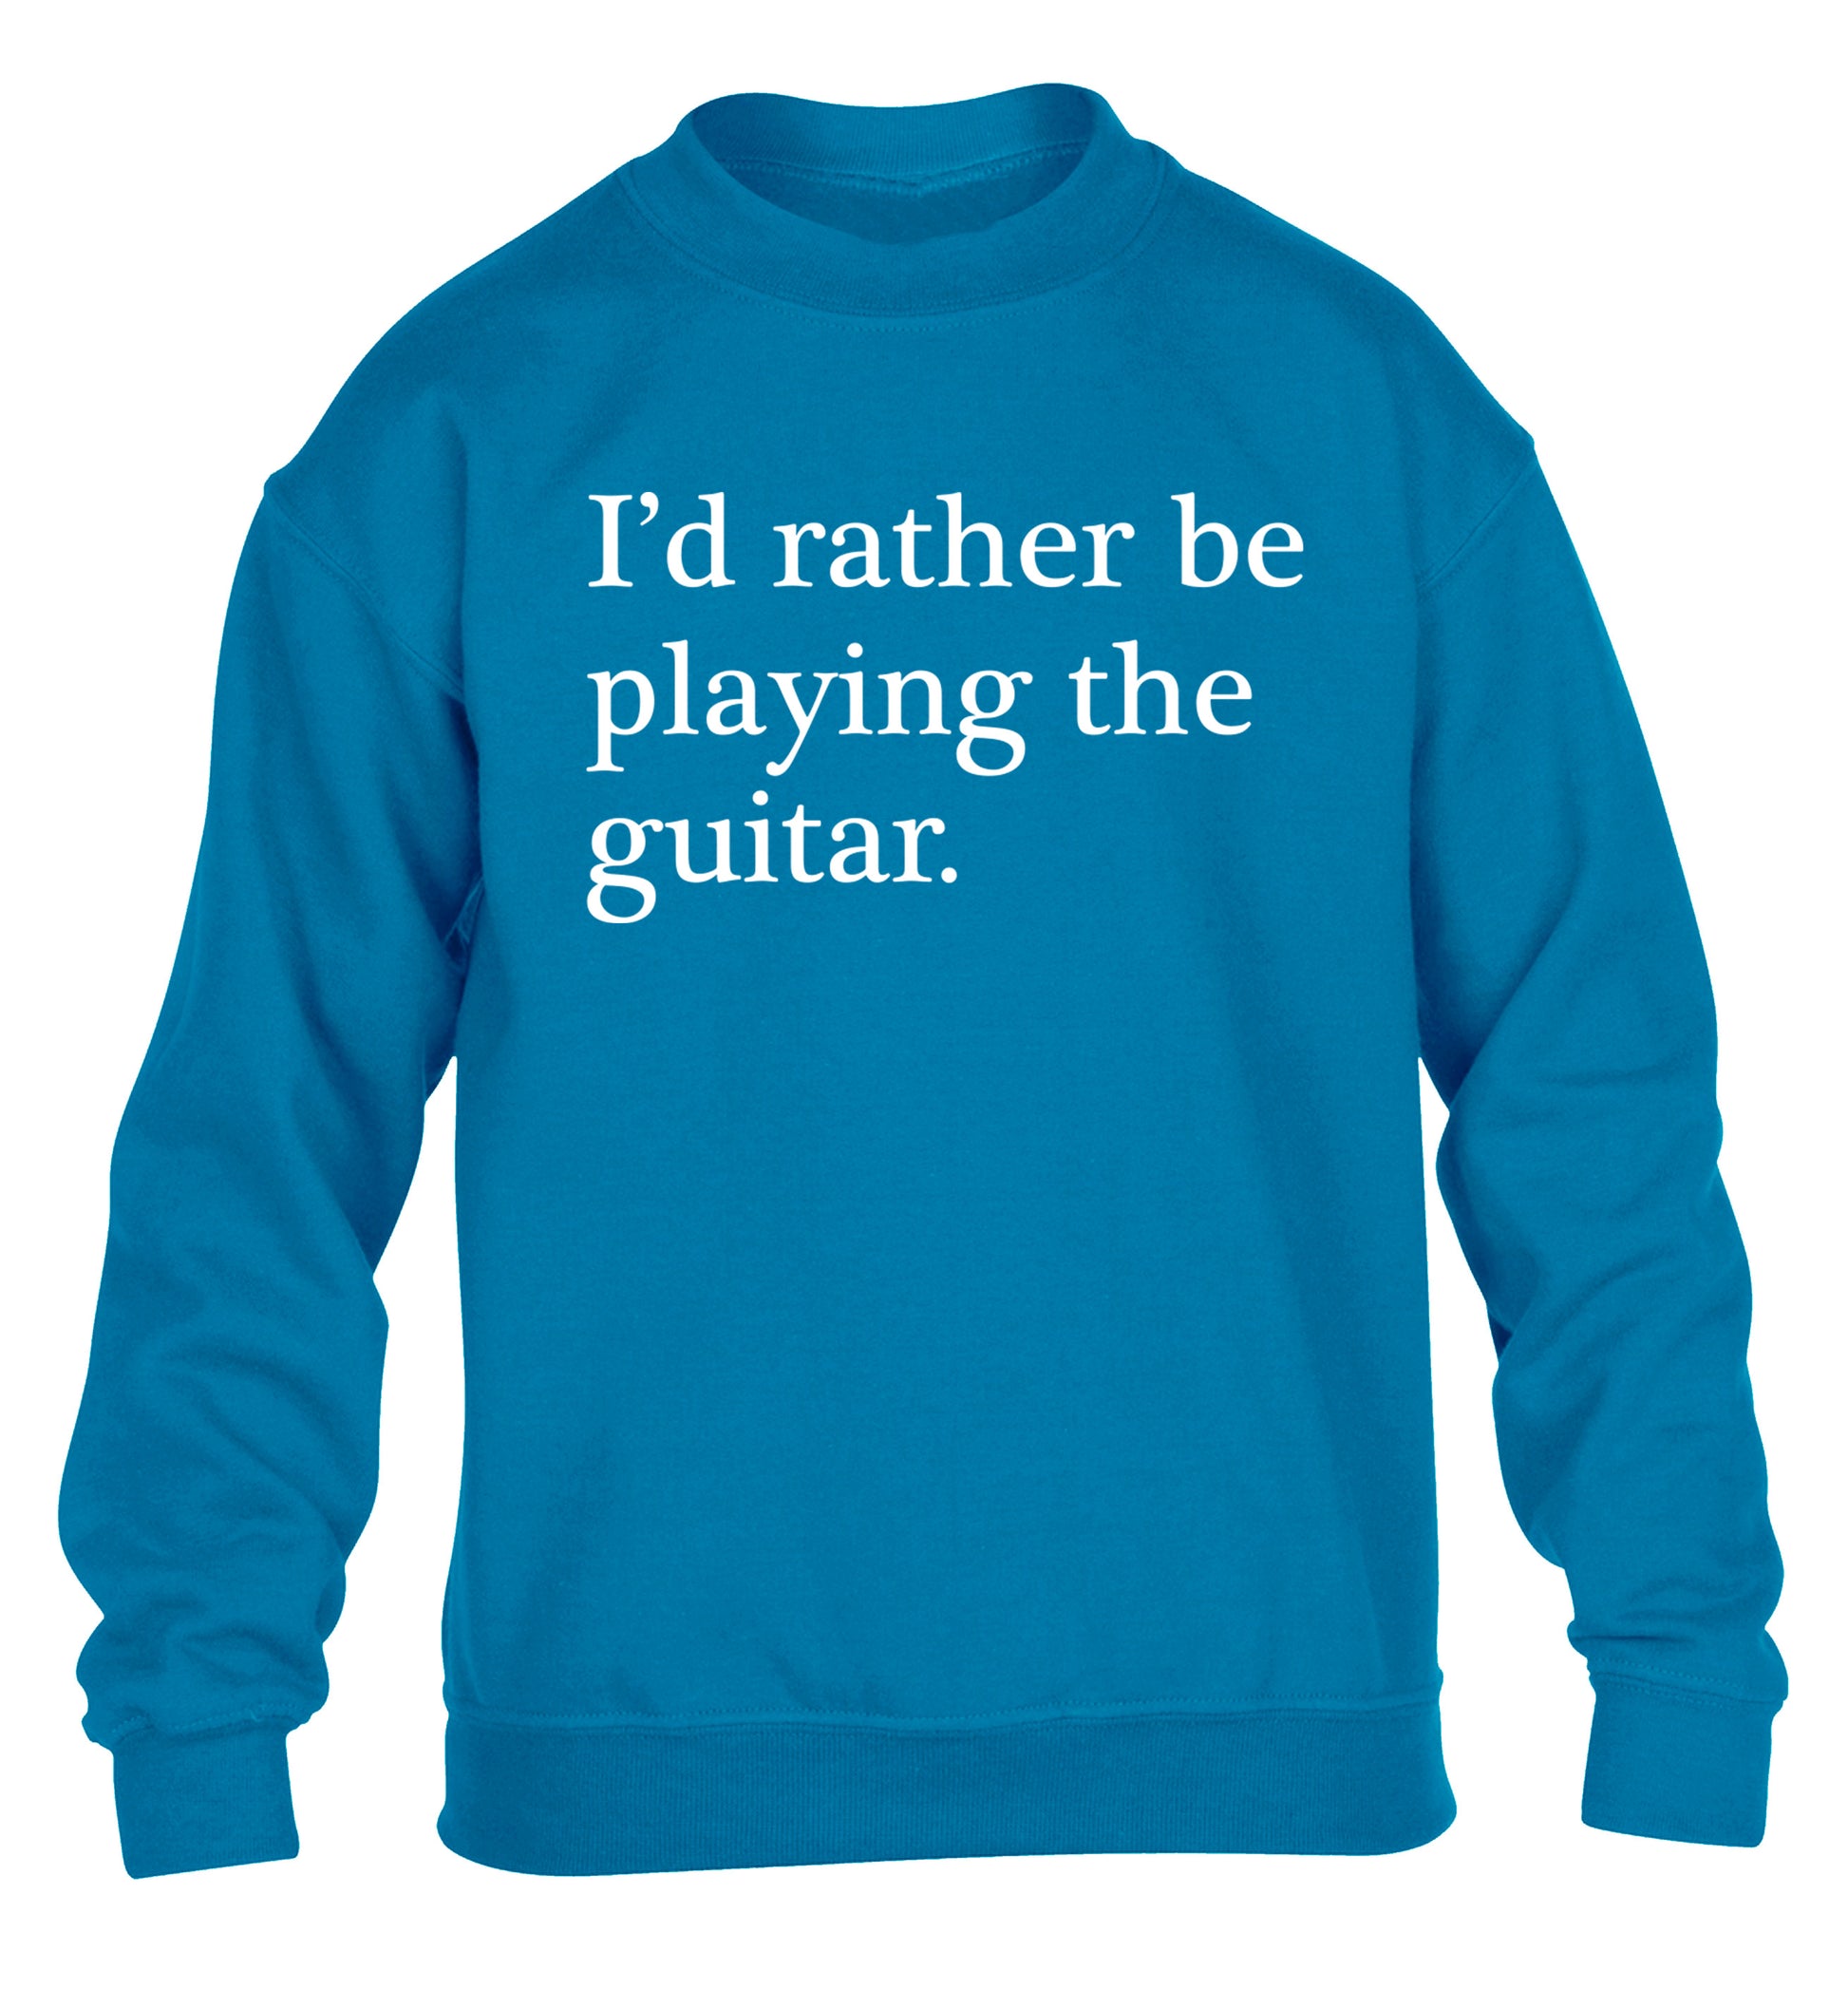 I'd rather be playing the guitar children's blue sweater 12-14 Years